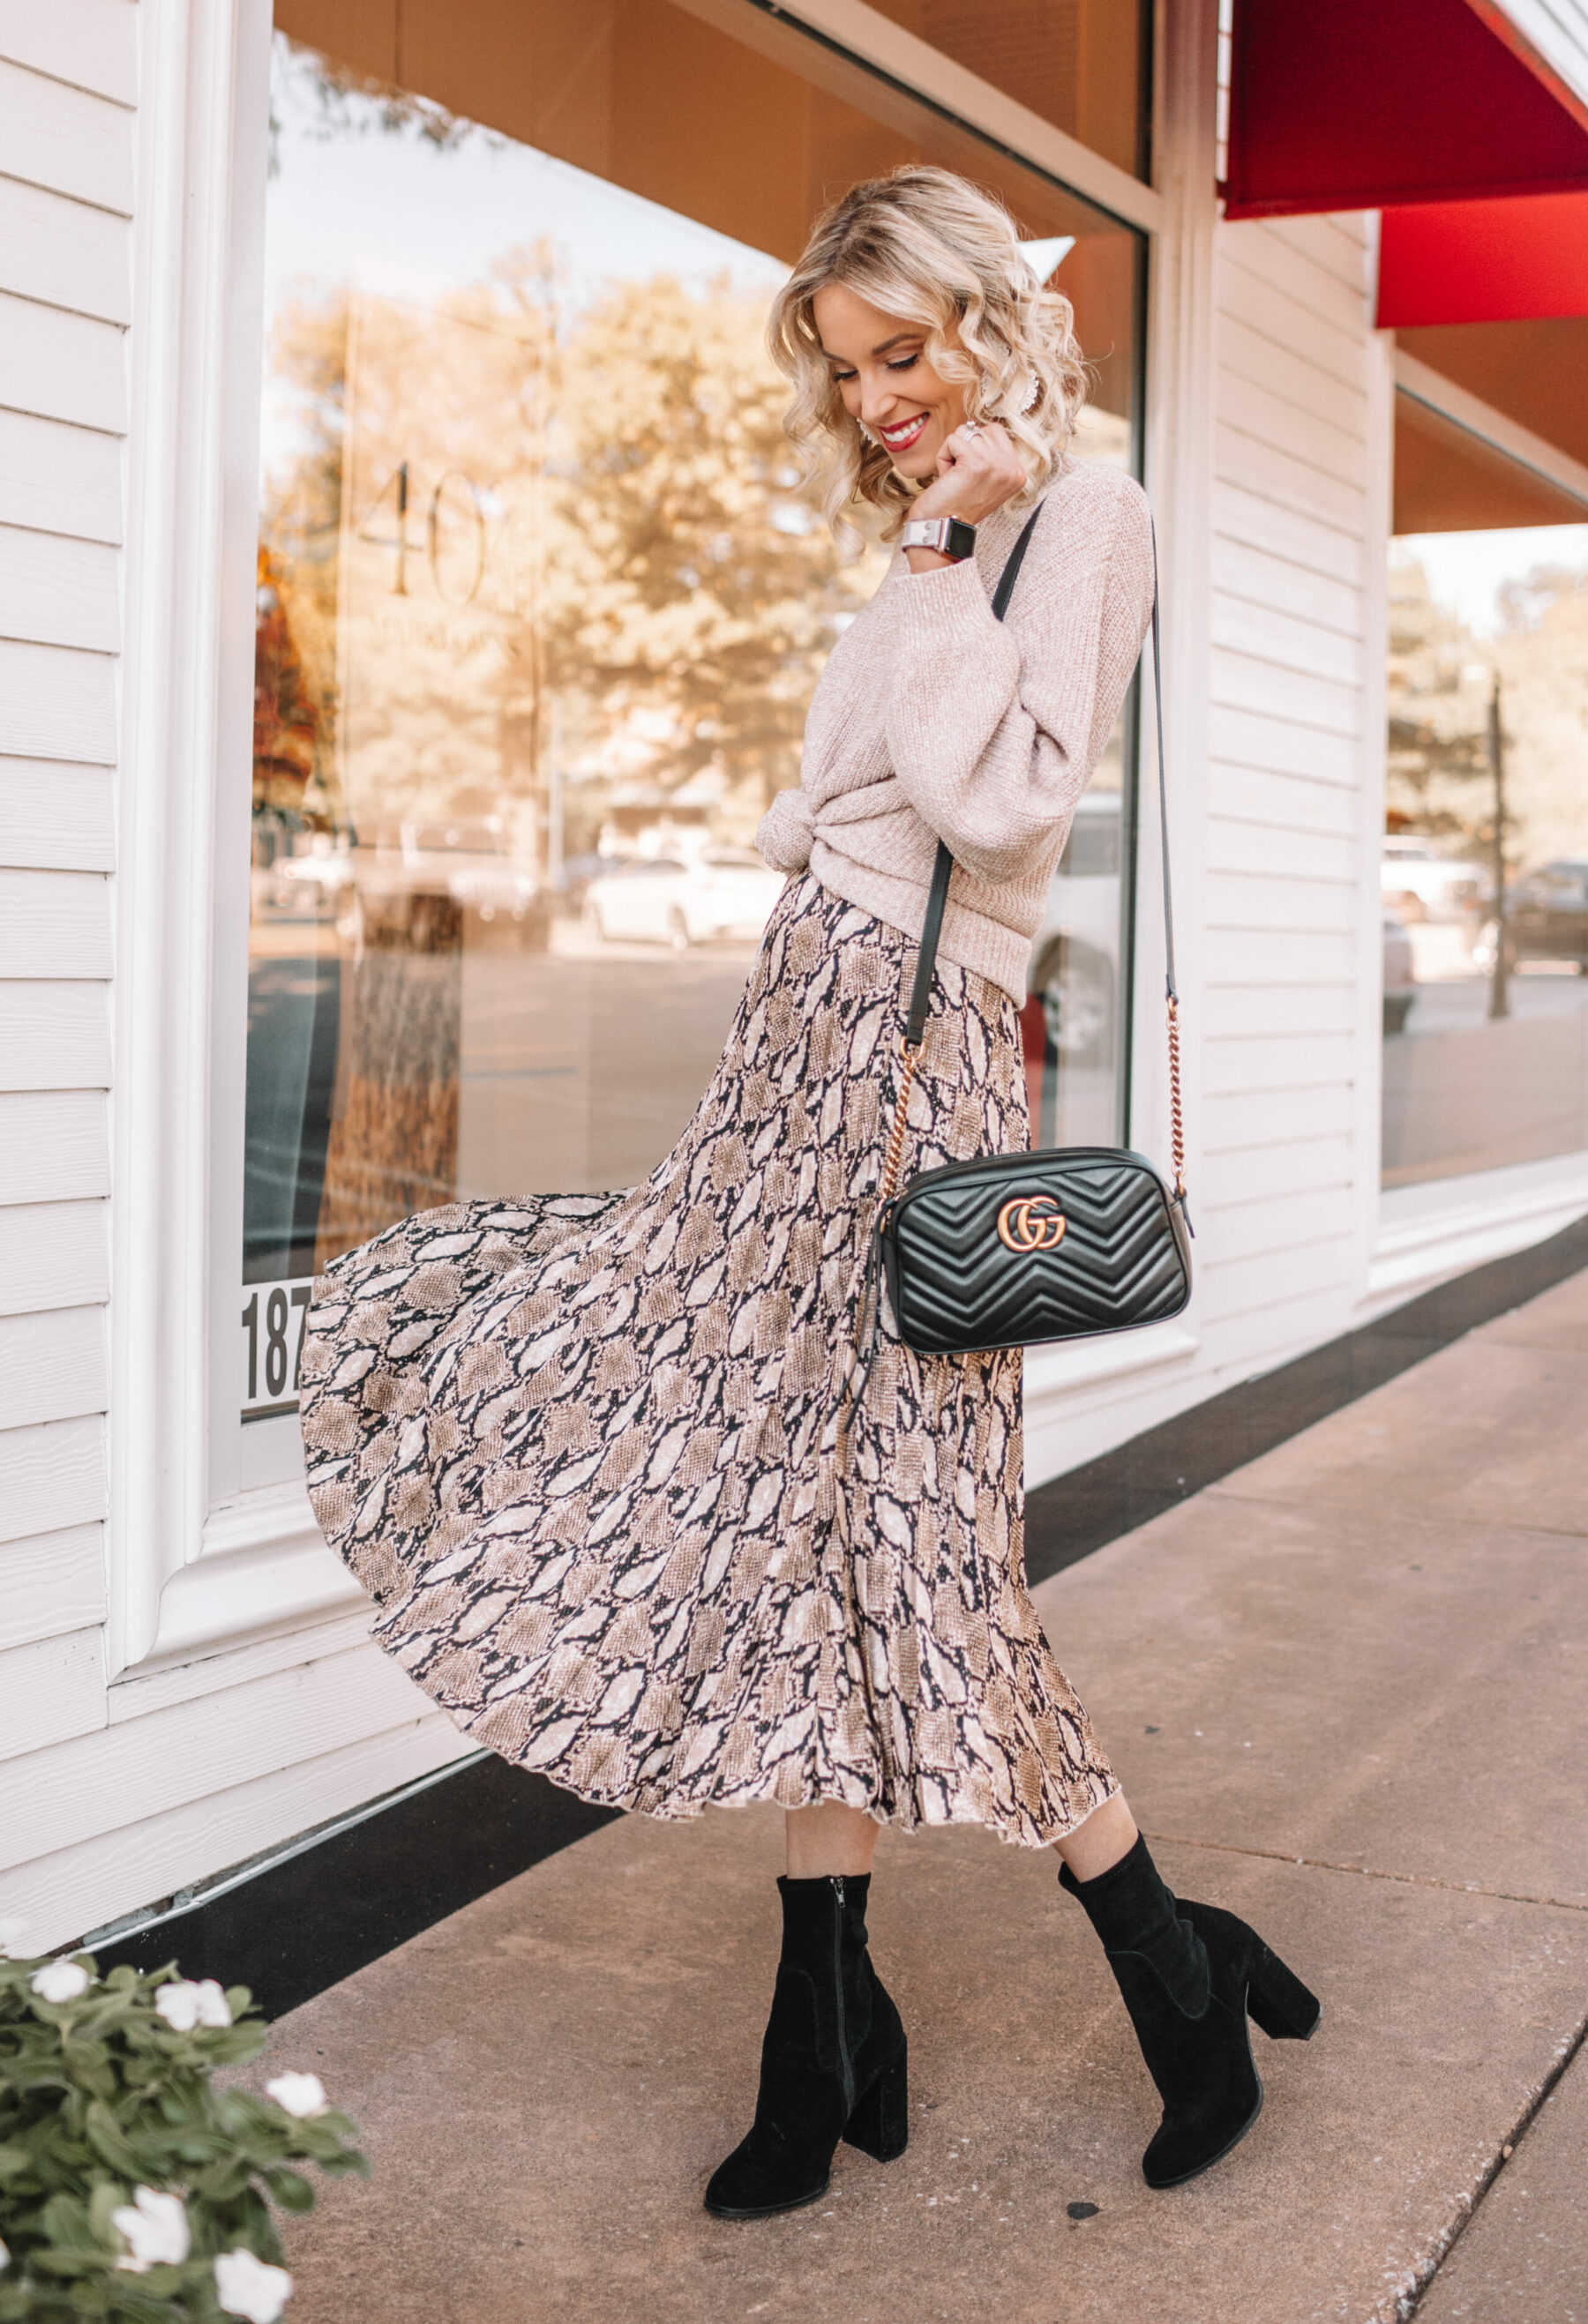 How to Wear a Midi Skirt - 10 Ways to 